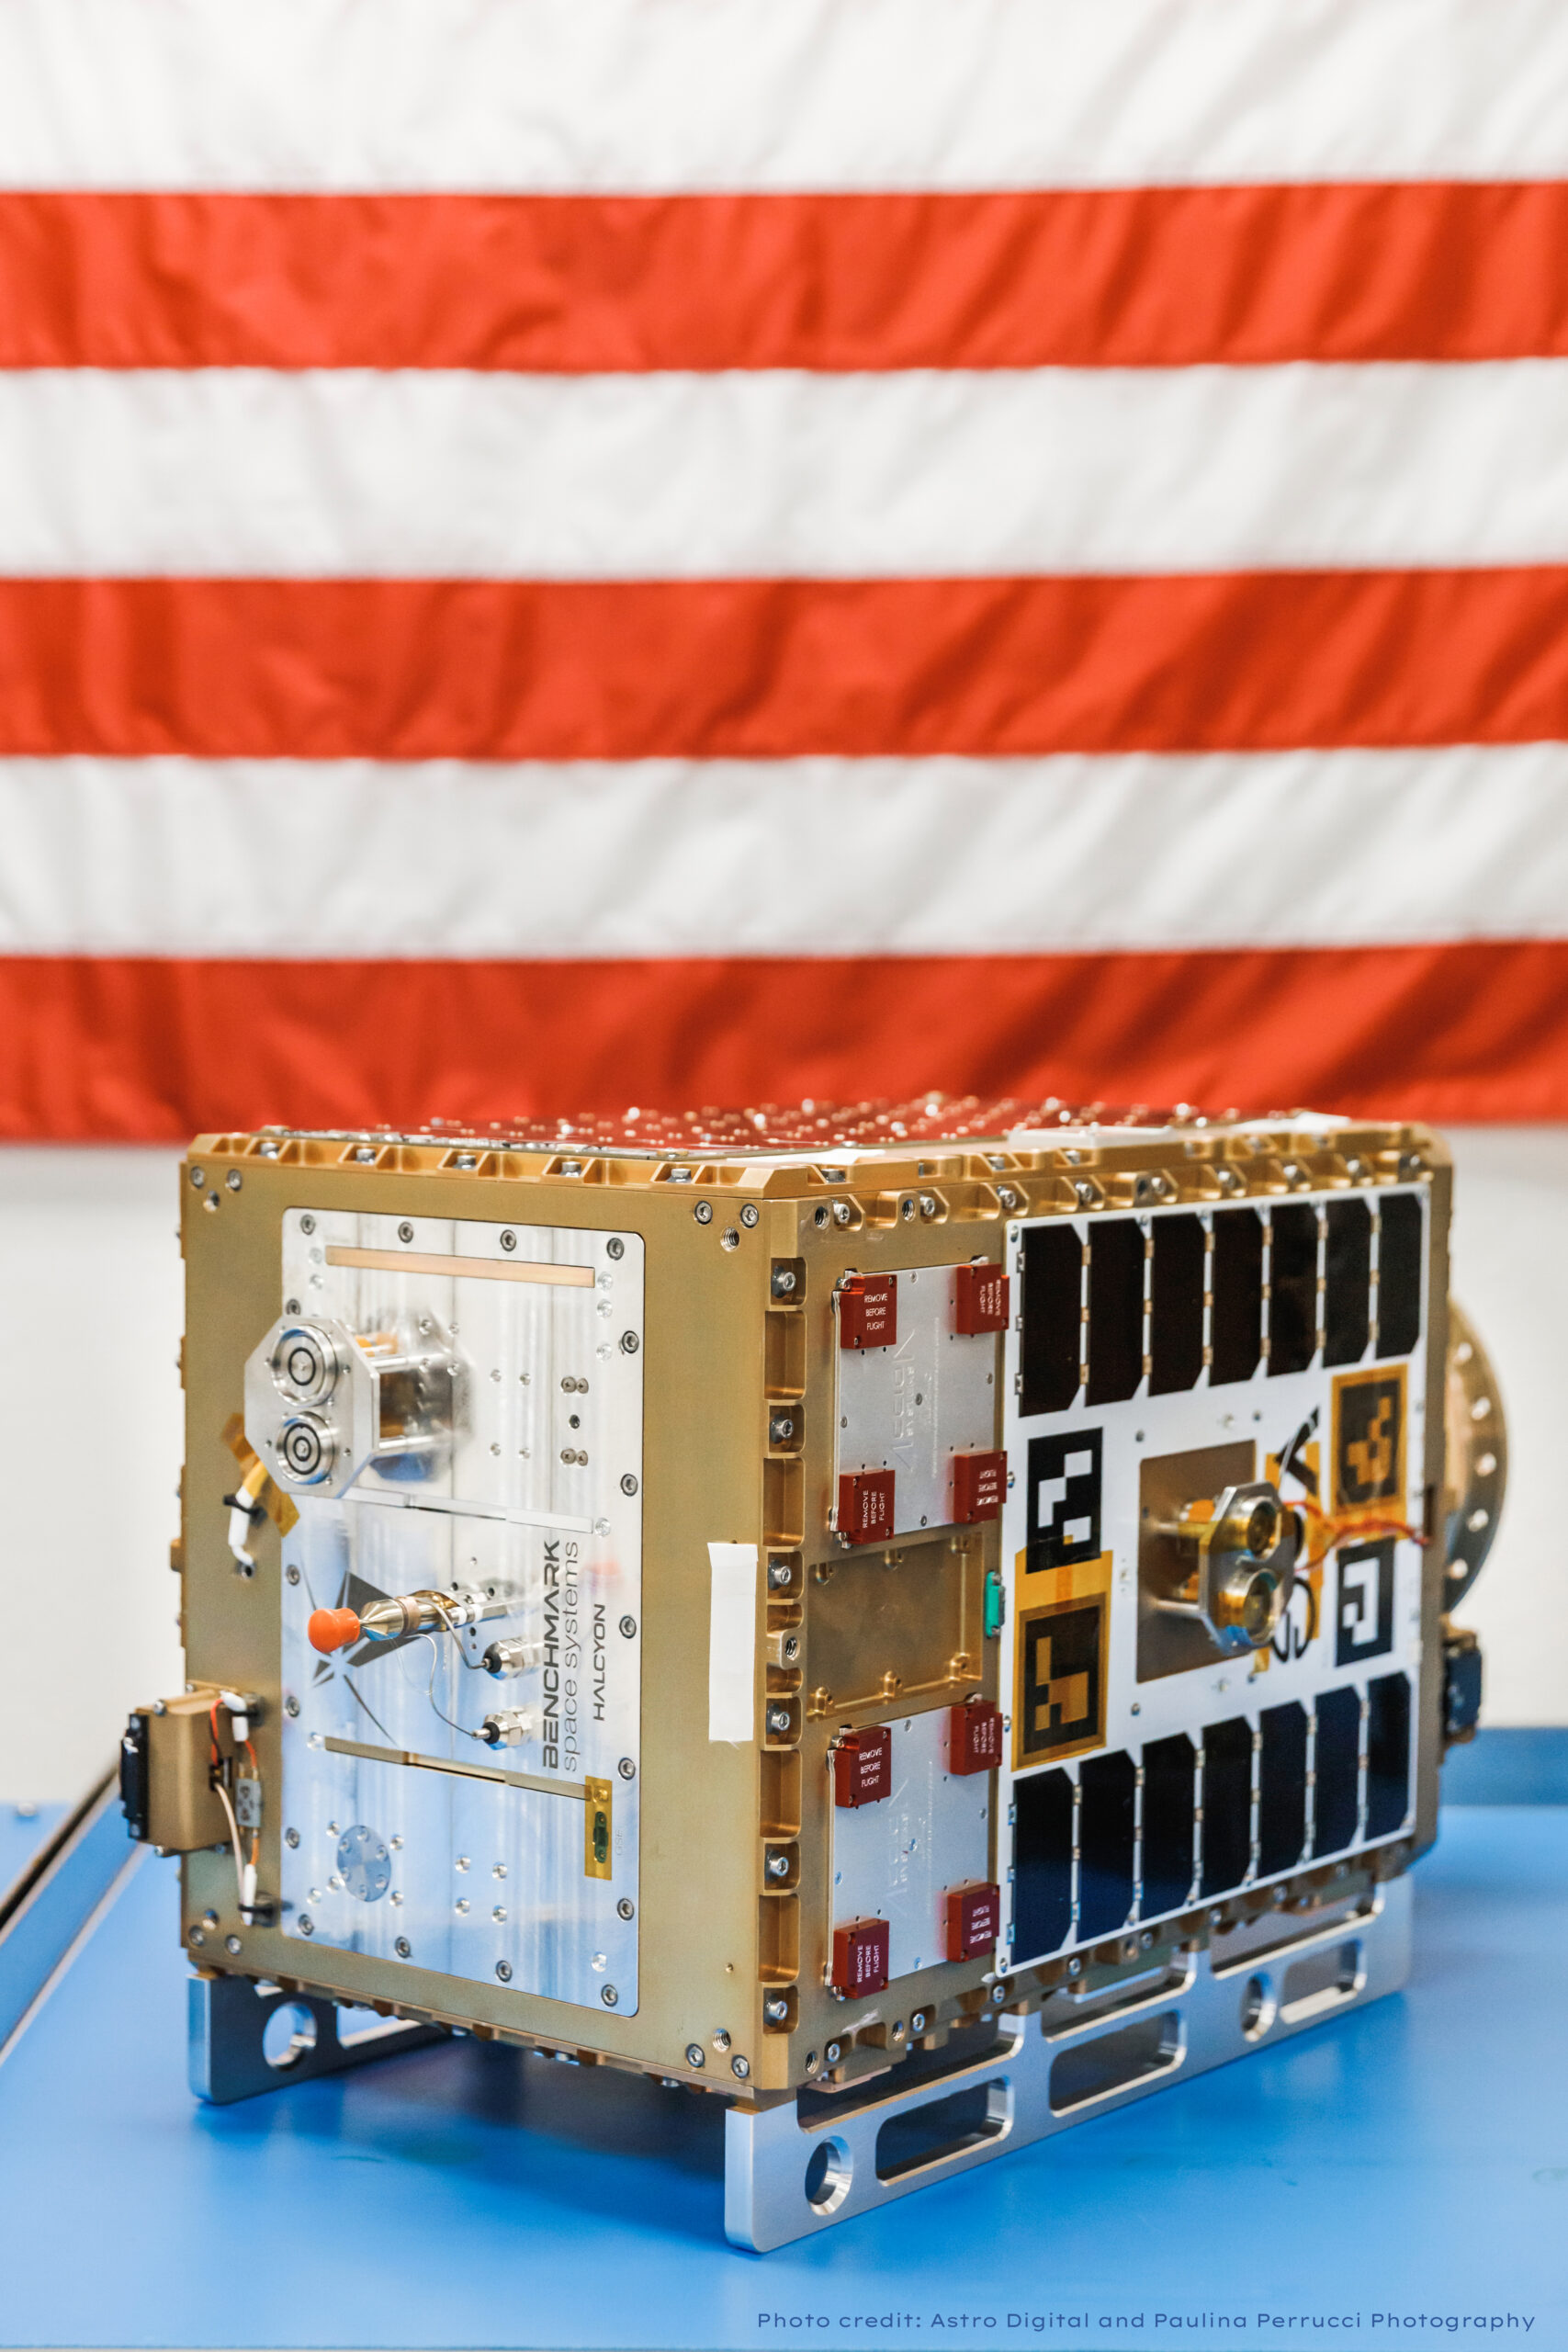 Orbit Fab Tenzing spacecraft on blue surface with American flag in background